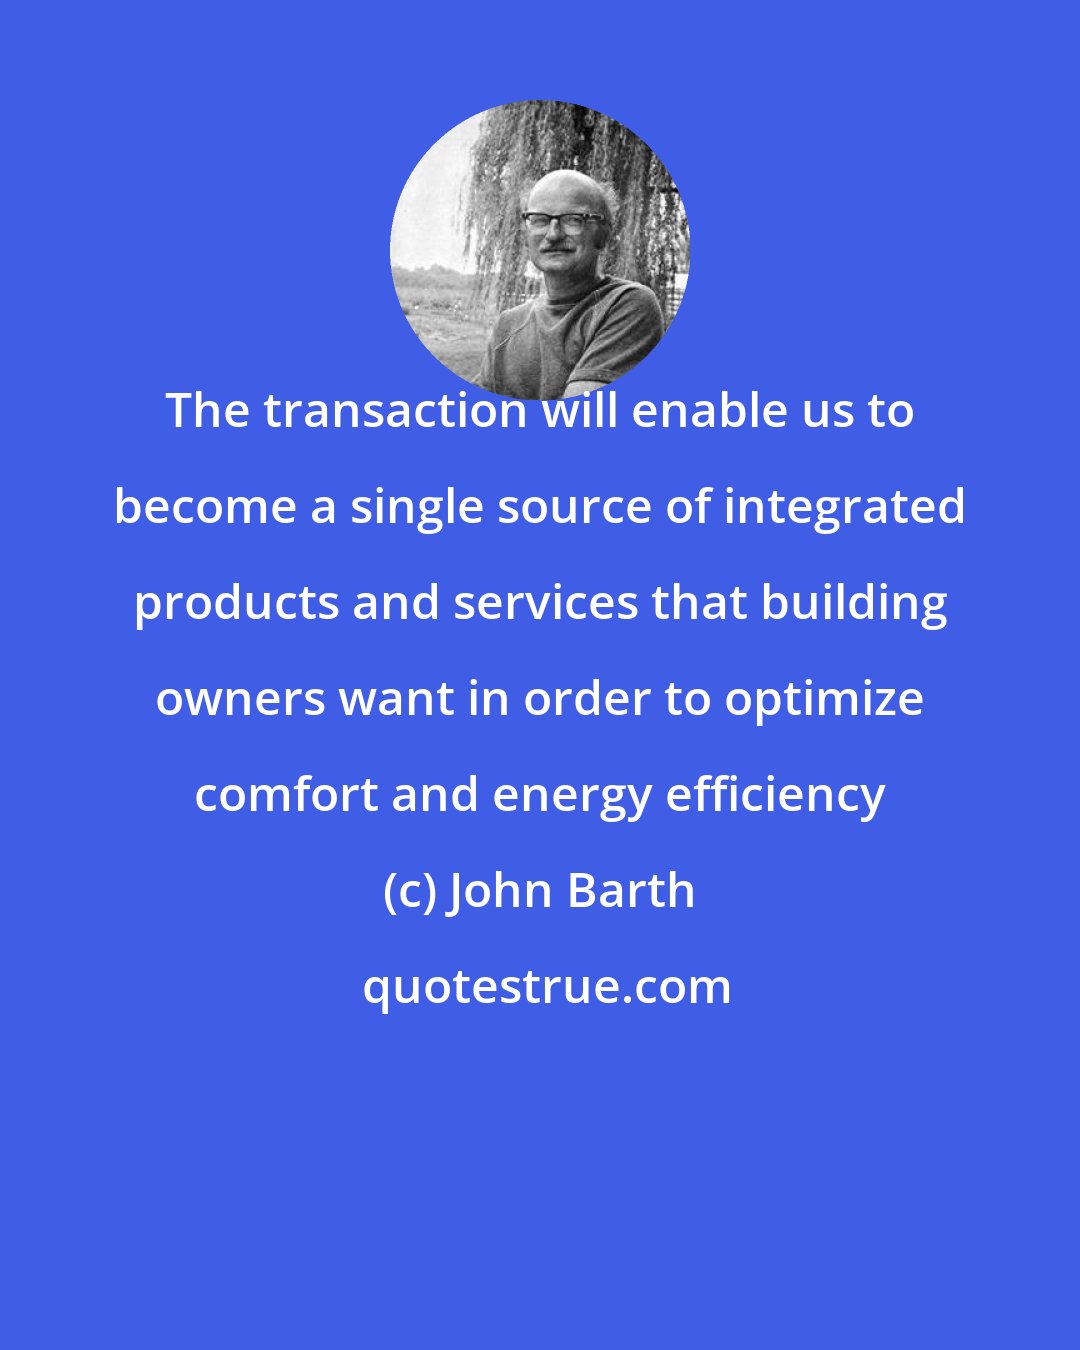 John Barth: The transaction will enable us to become a single source of integrated products and services that building owners want in order to optimize comfort and energy efficiency